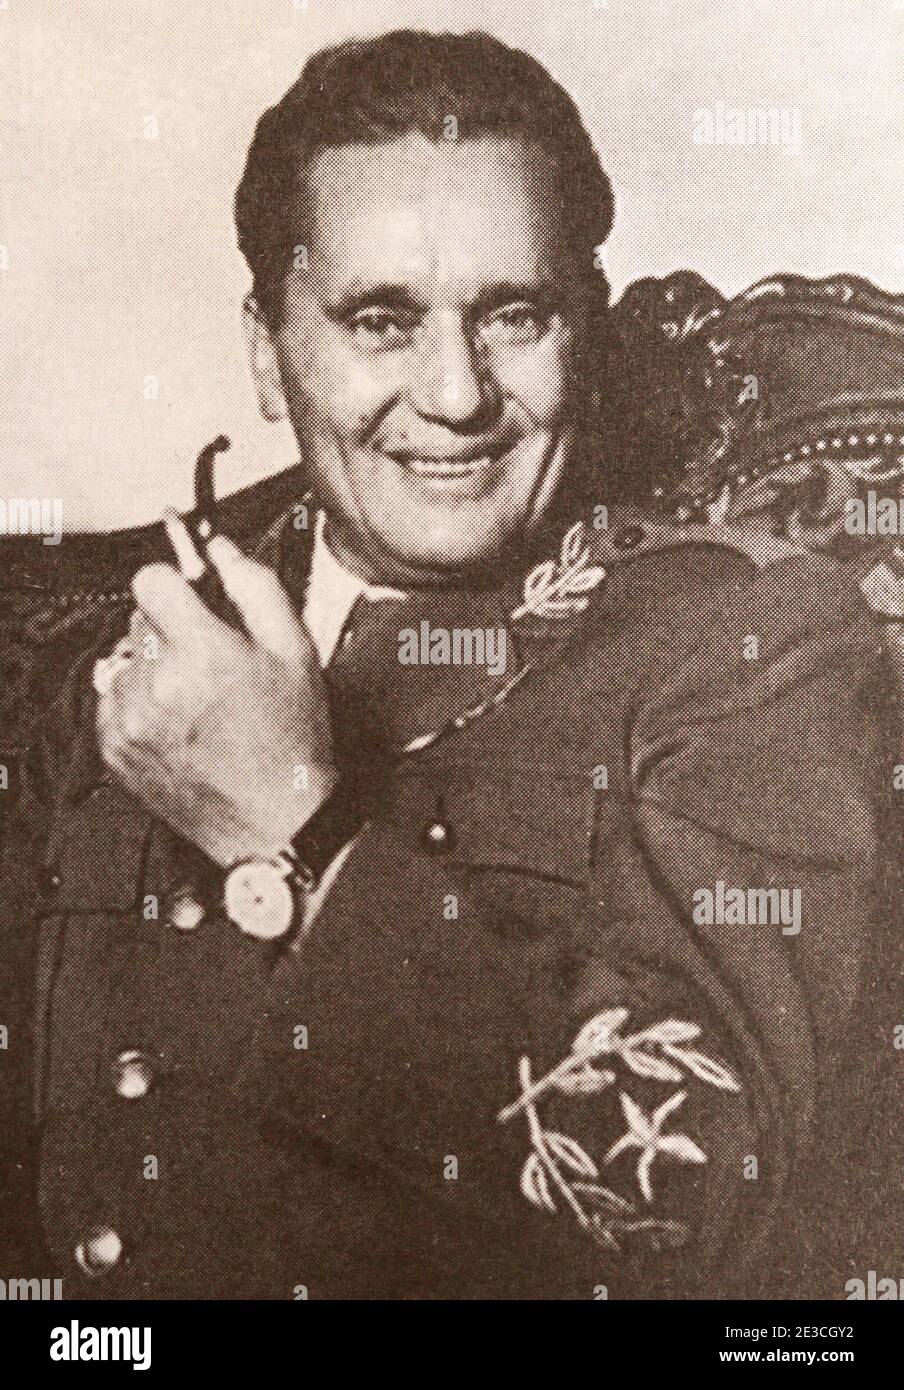 Josip Broz Tito. Josip Broz Tito was a Yugoslav communist revolutionary and statesman, serving in various roles from 1943 until his death in 1980. During World War II, he was the leader of the Partisans, often regarded as the most effective resistance movement in occupied Europe. He also served as the President of the Socialist Federal Republic of Yugoslavia from 14 January 1953 until his death on 4 May 1980. Stock Photo